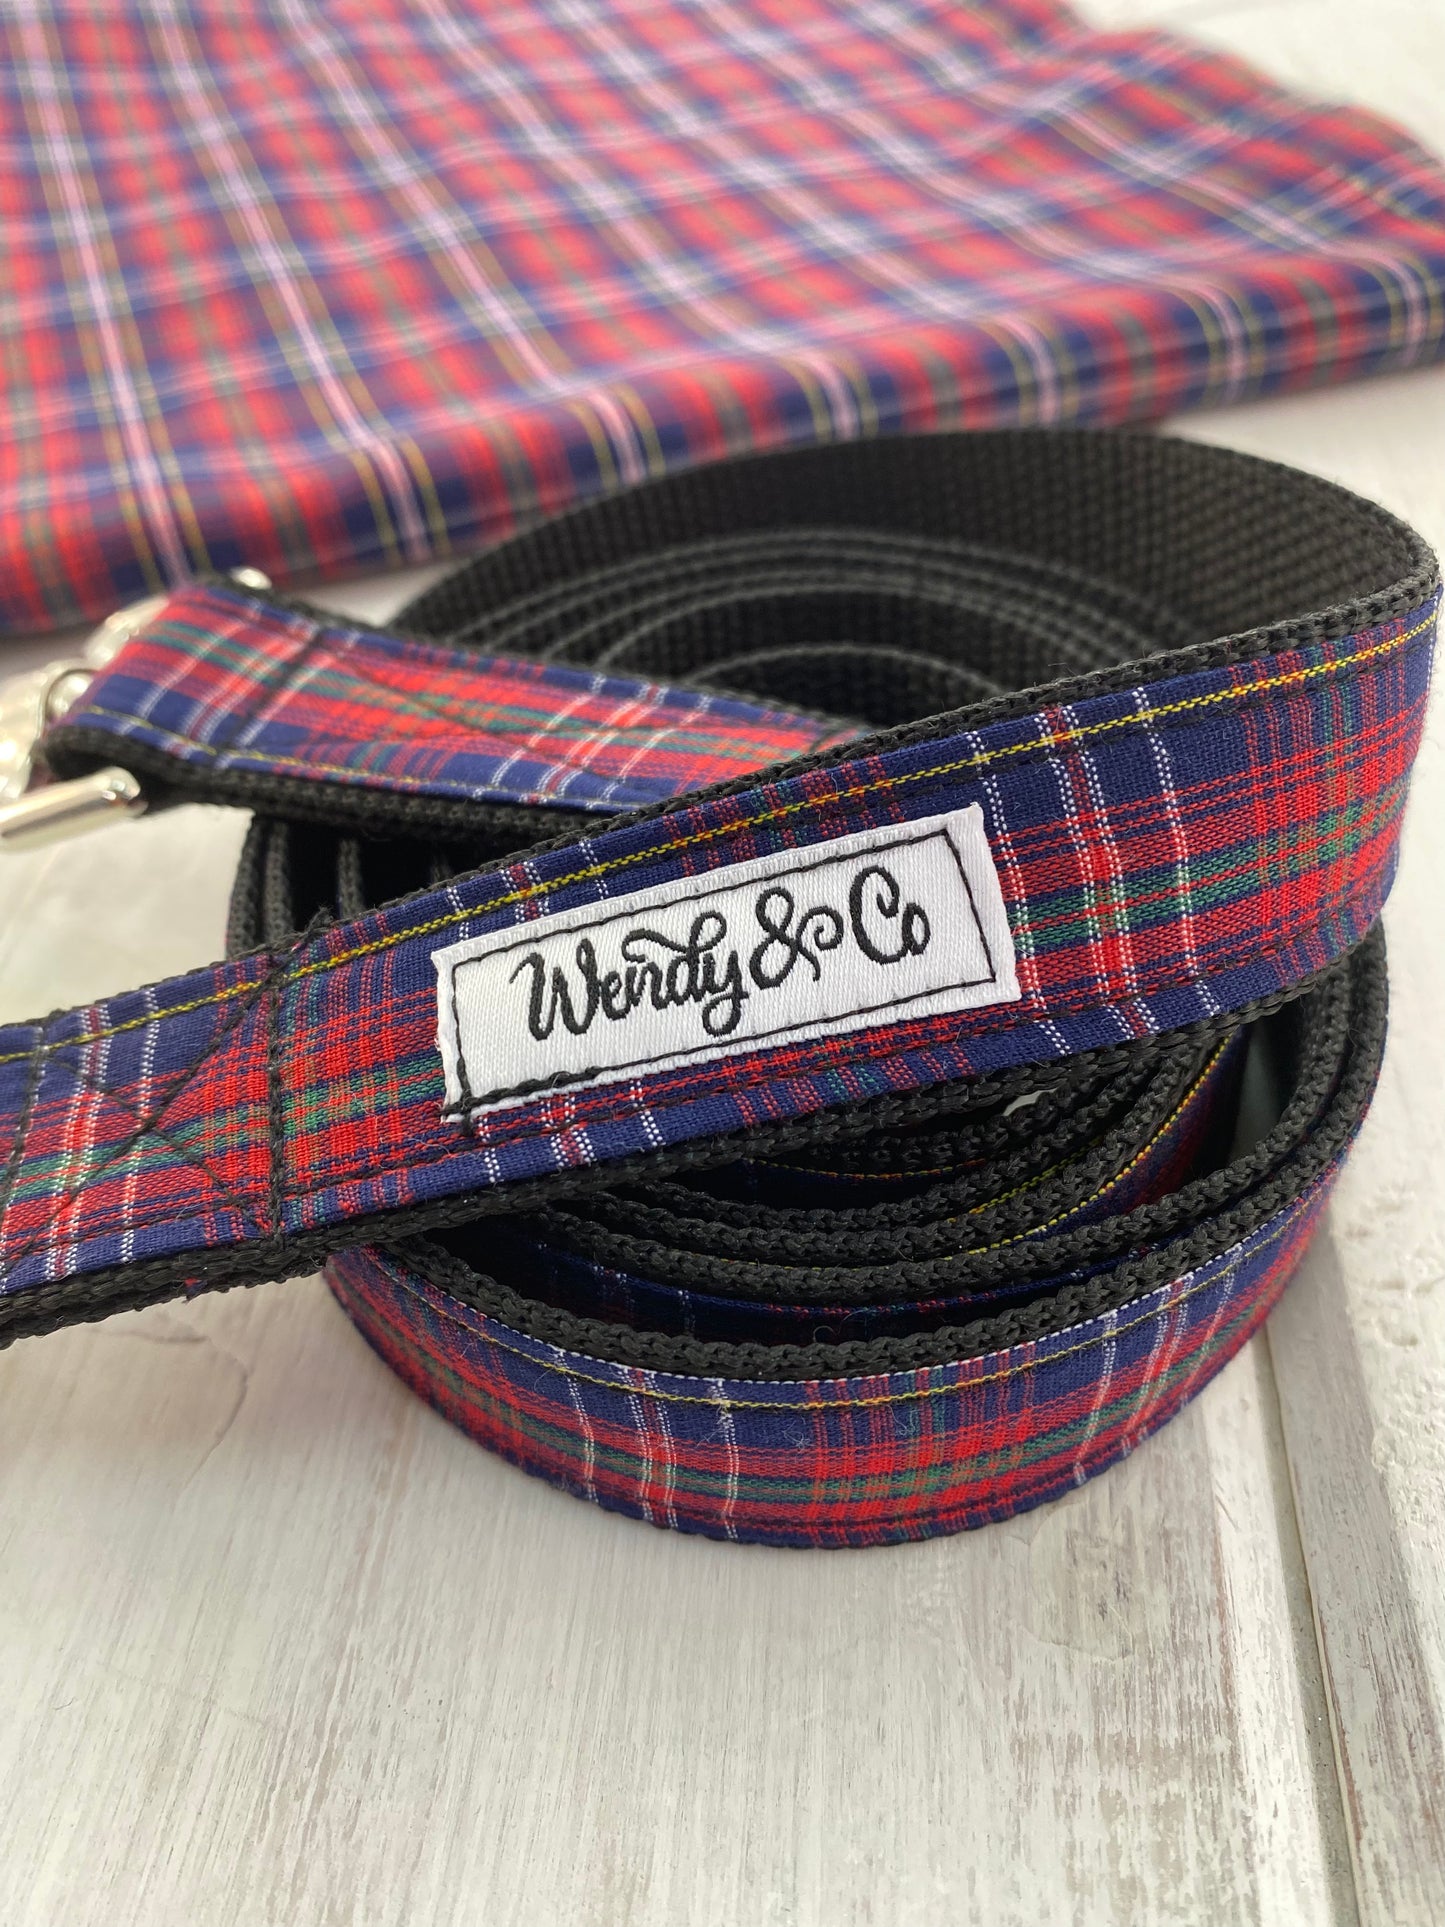 Plaid dog leash for large to extra large dogs.